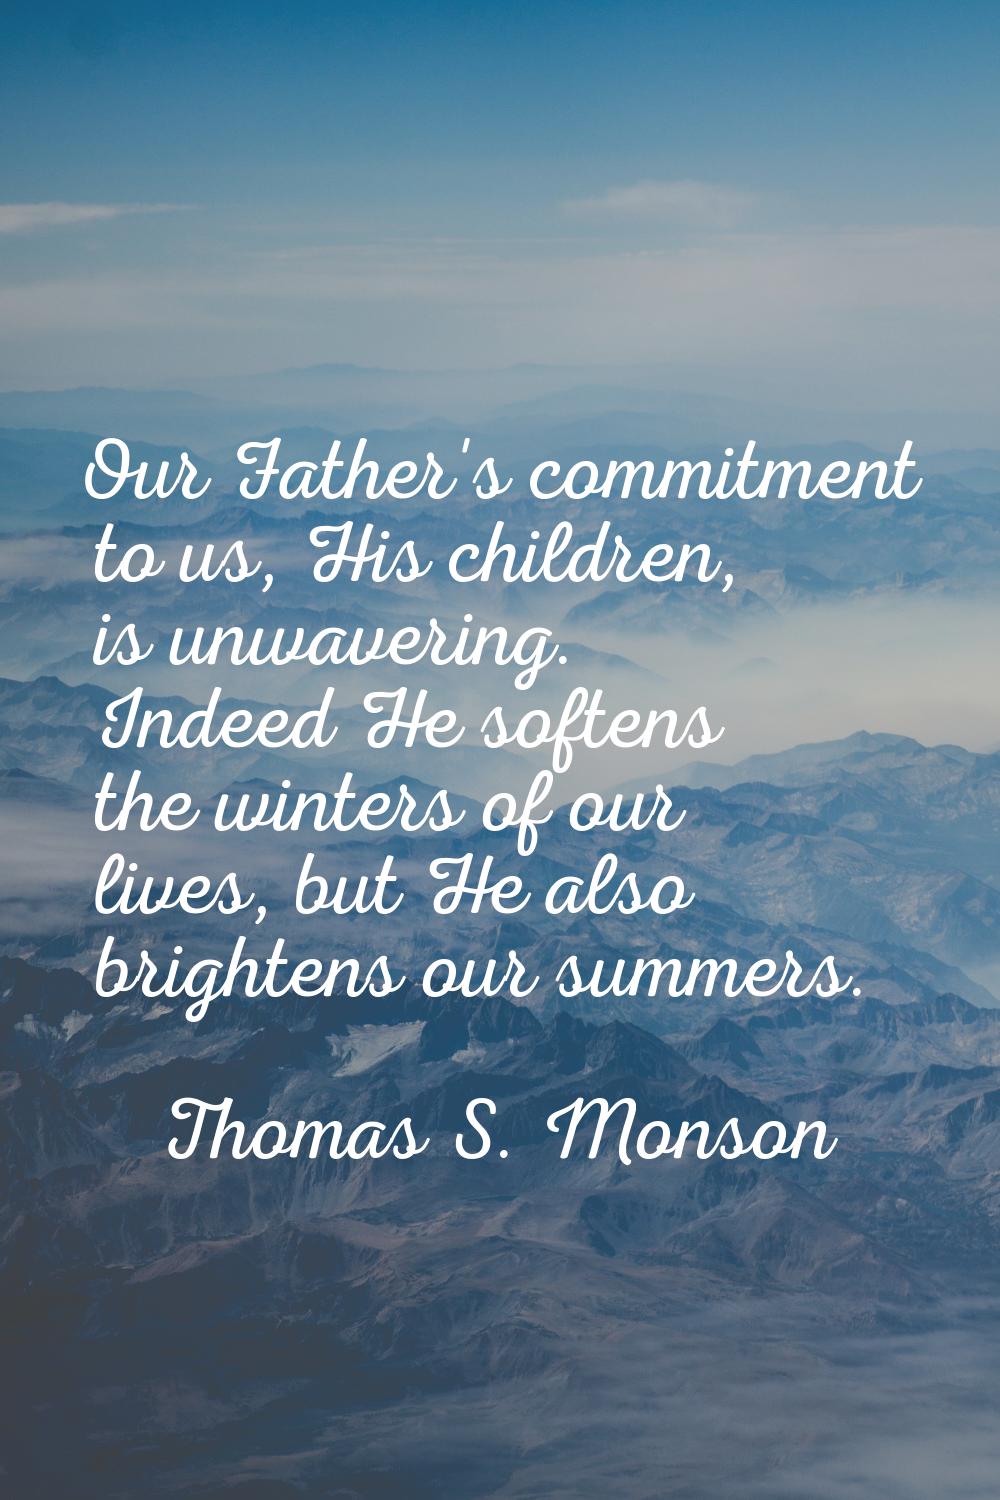 Our Father's commitment to us, His children, is unwavering. Indeed He softens the winters of our li